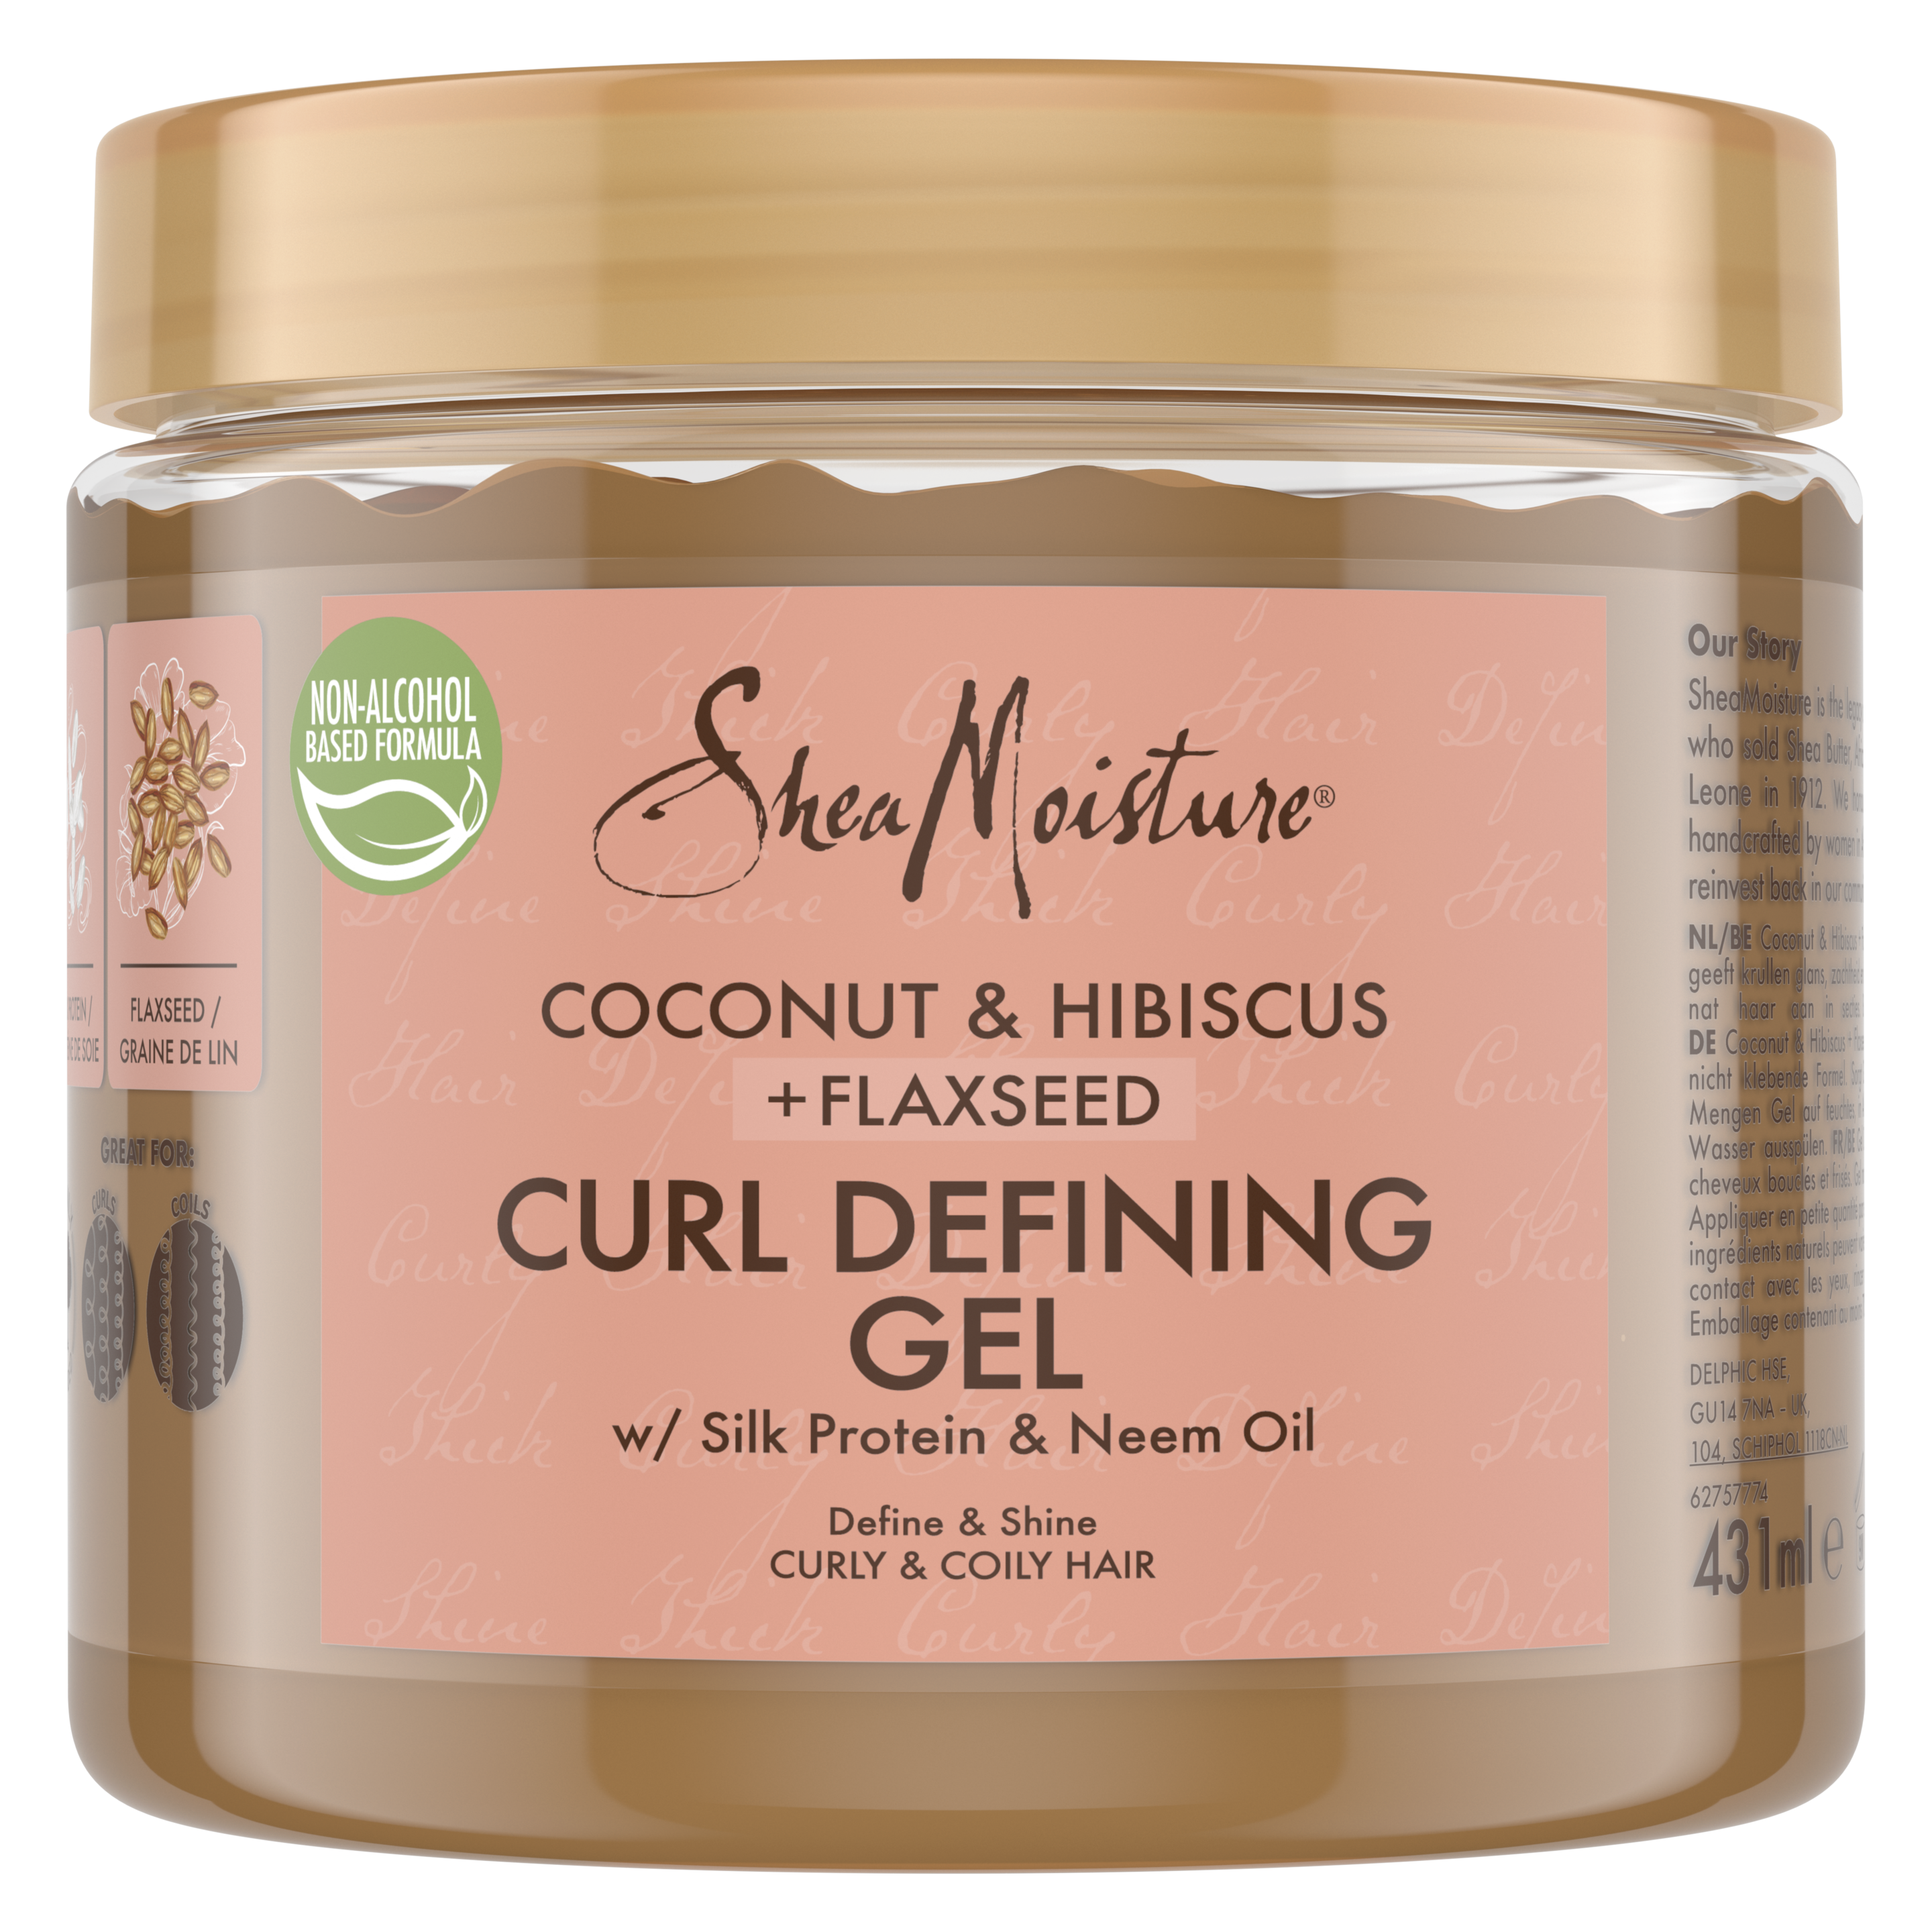 Cocout & Hibiscus Defining Styling Gel packshot